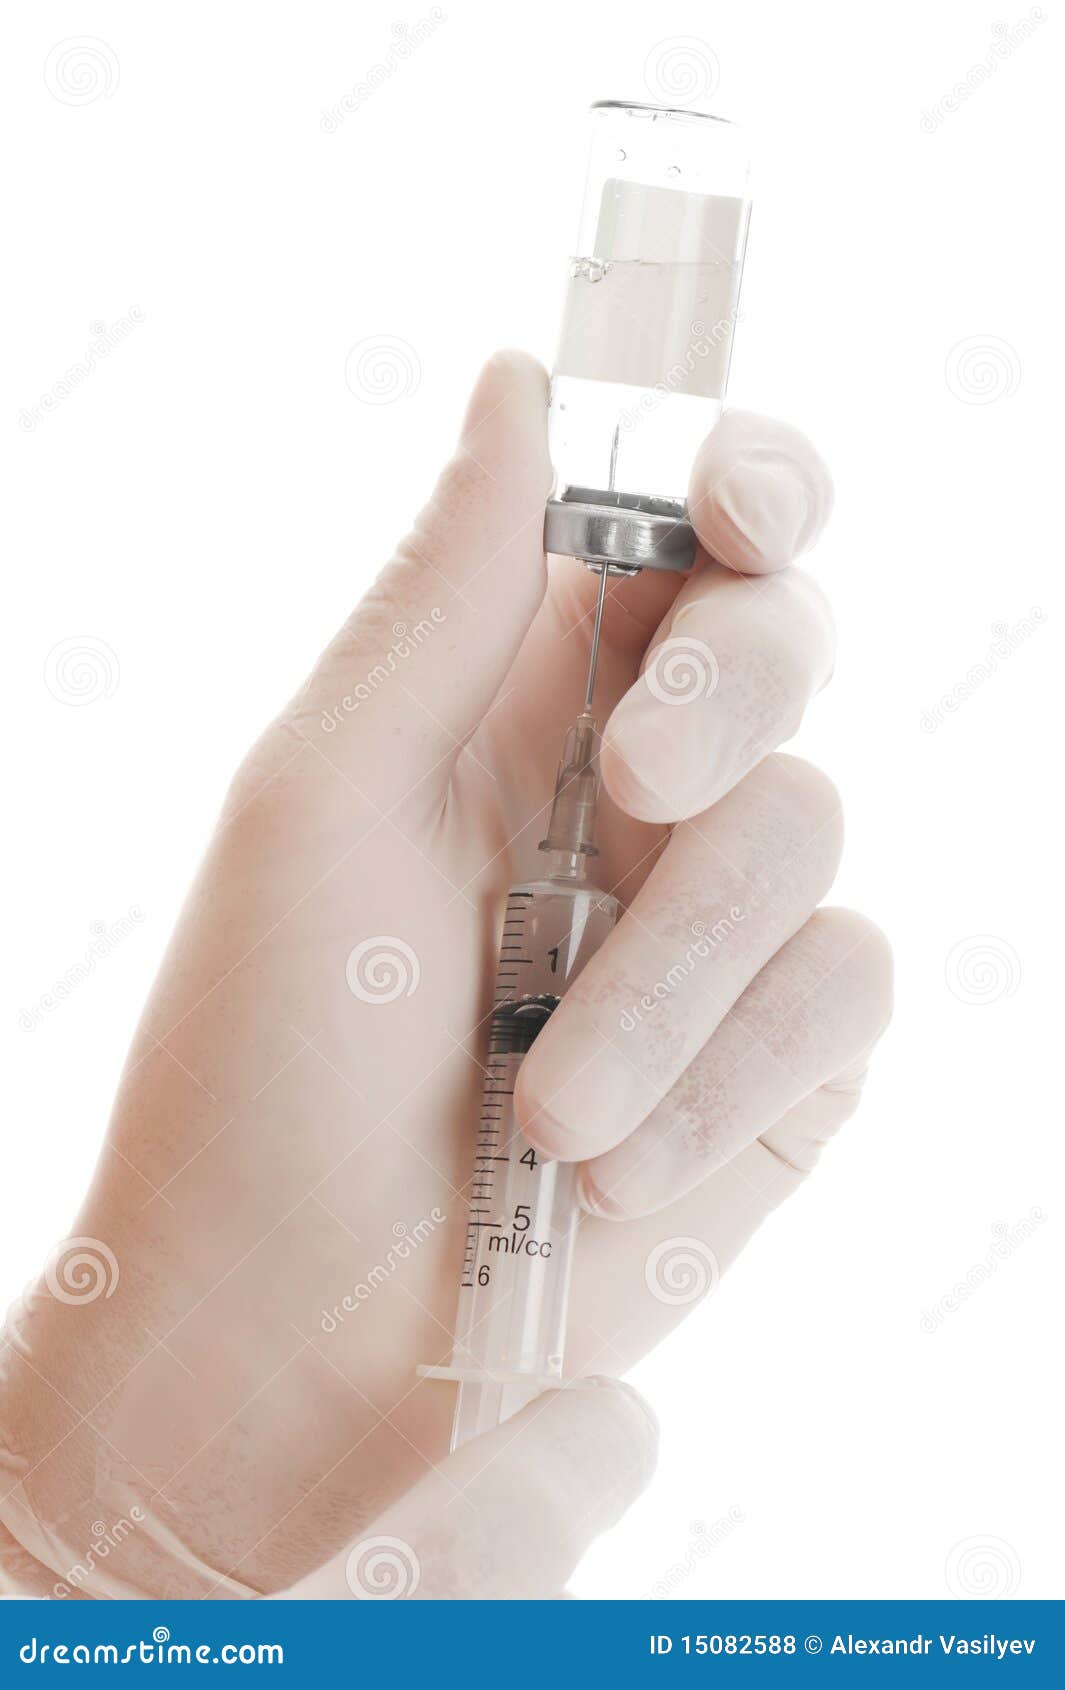 syringe and vial in hands